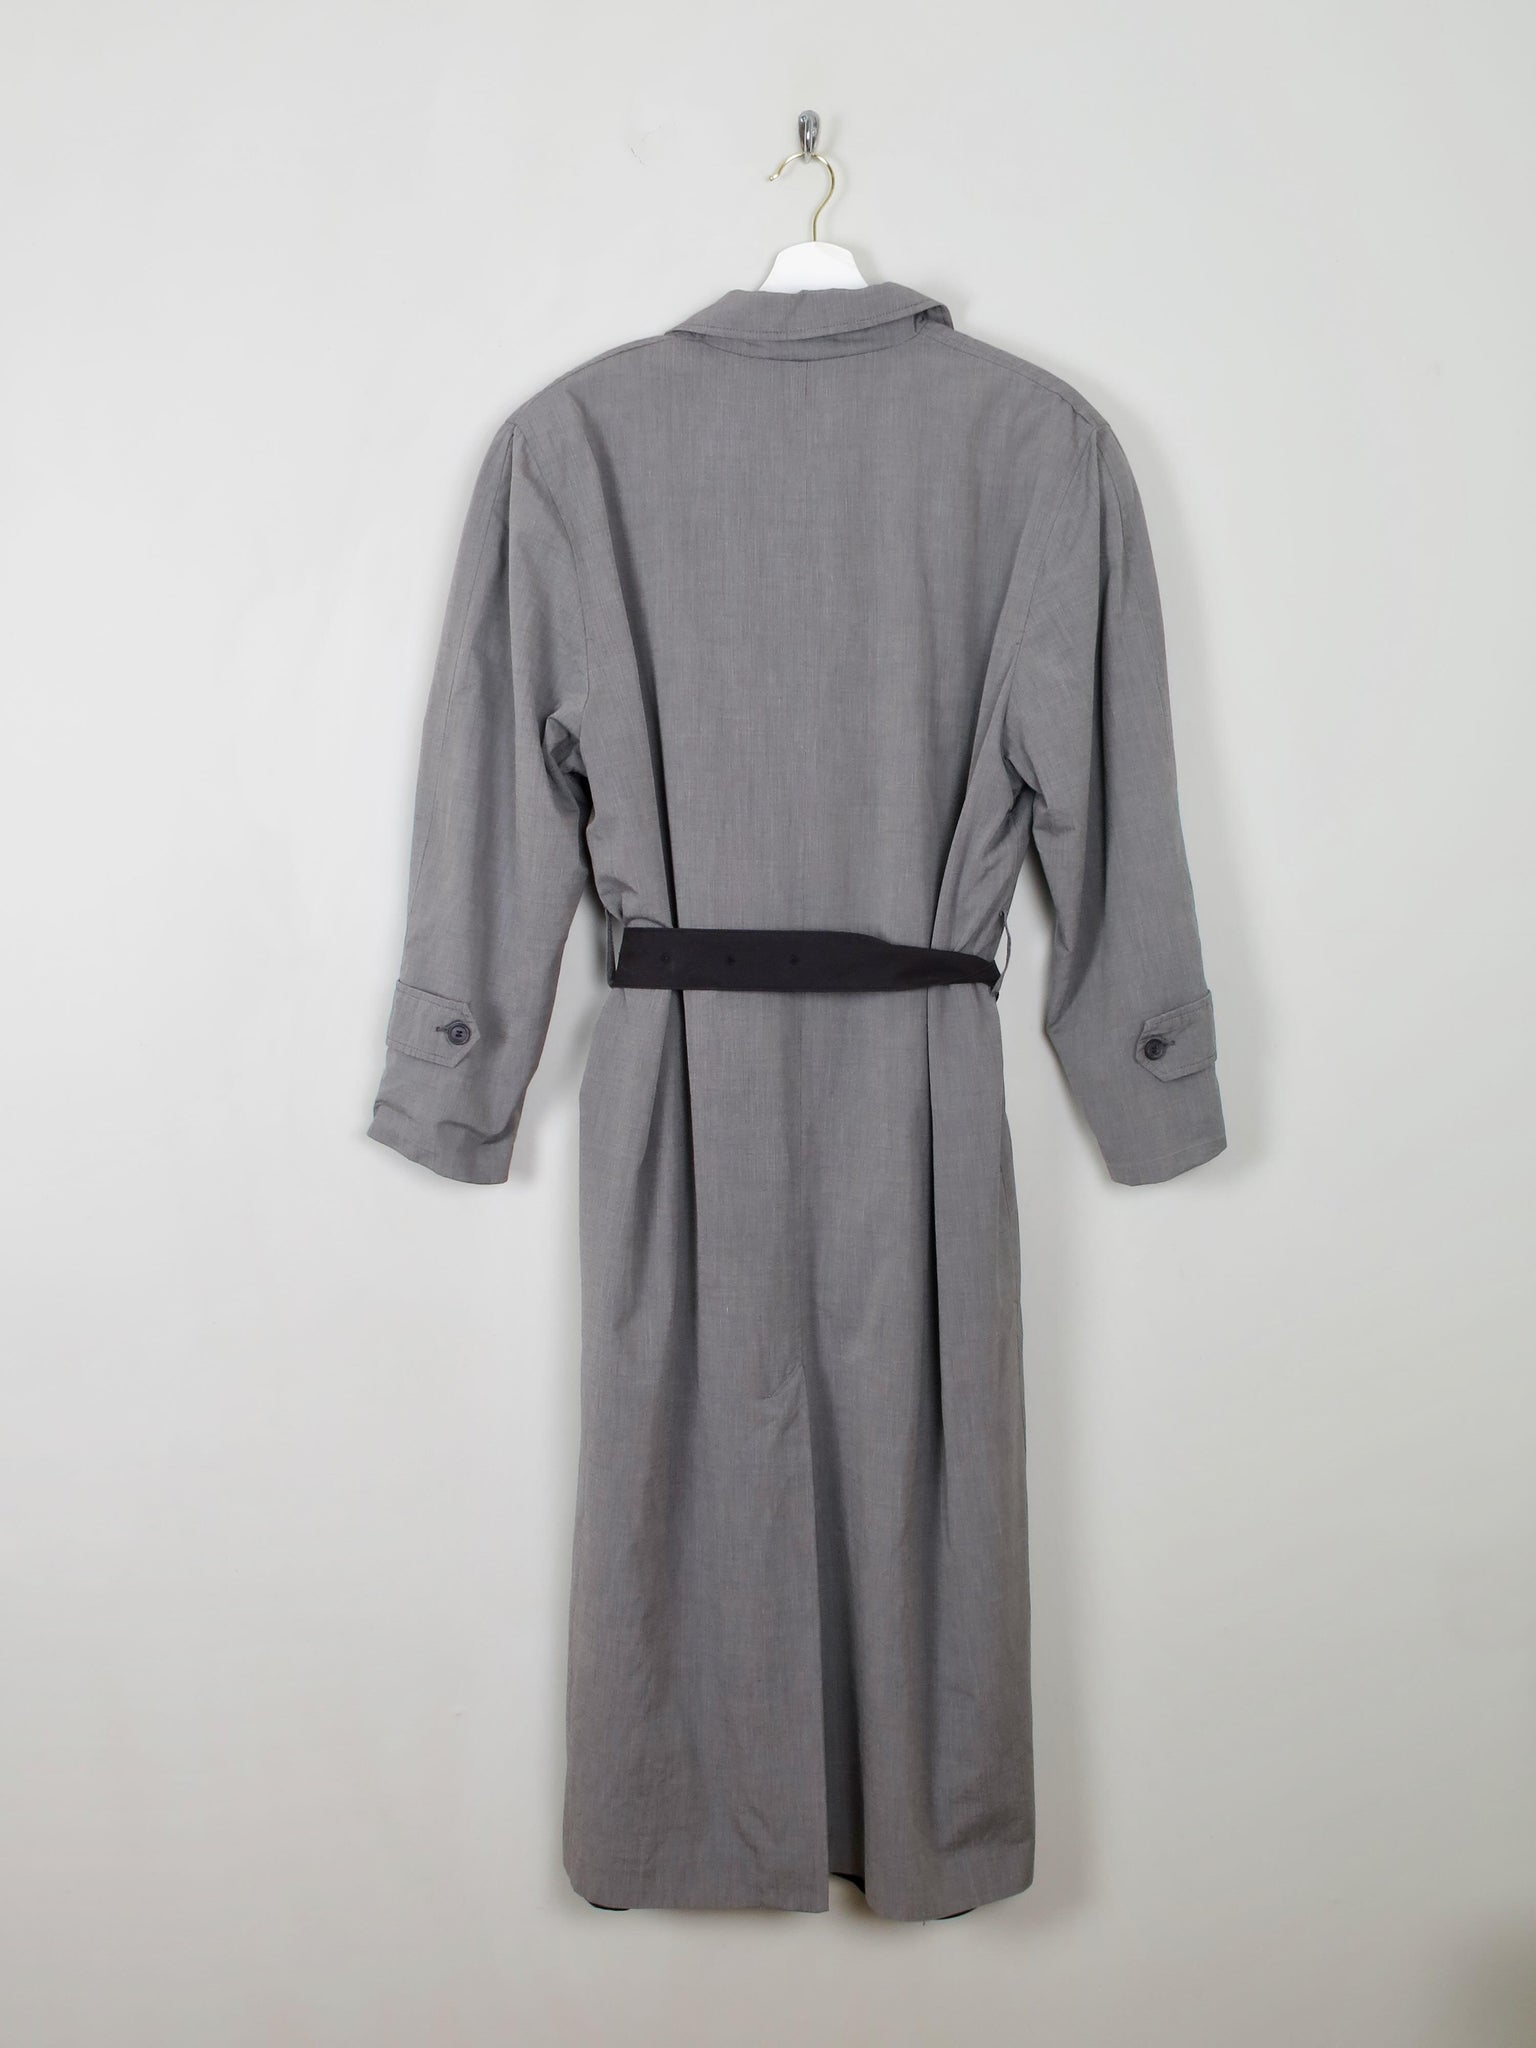 Women's Charcoal Vintage Trench Coat S-L - The Harlequin